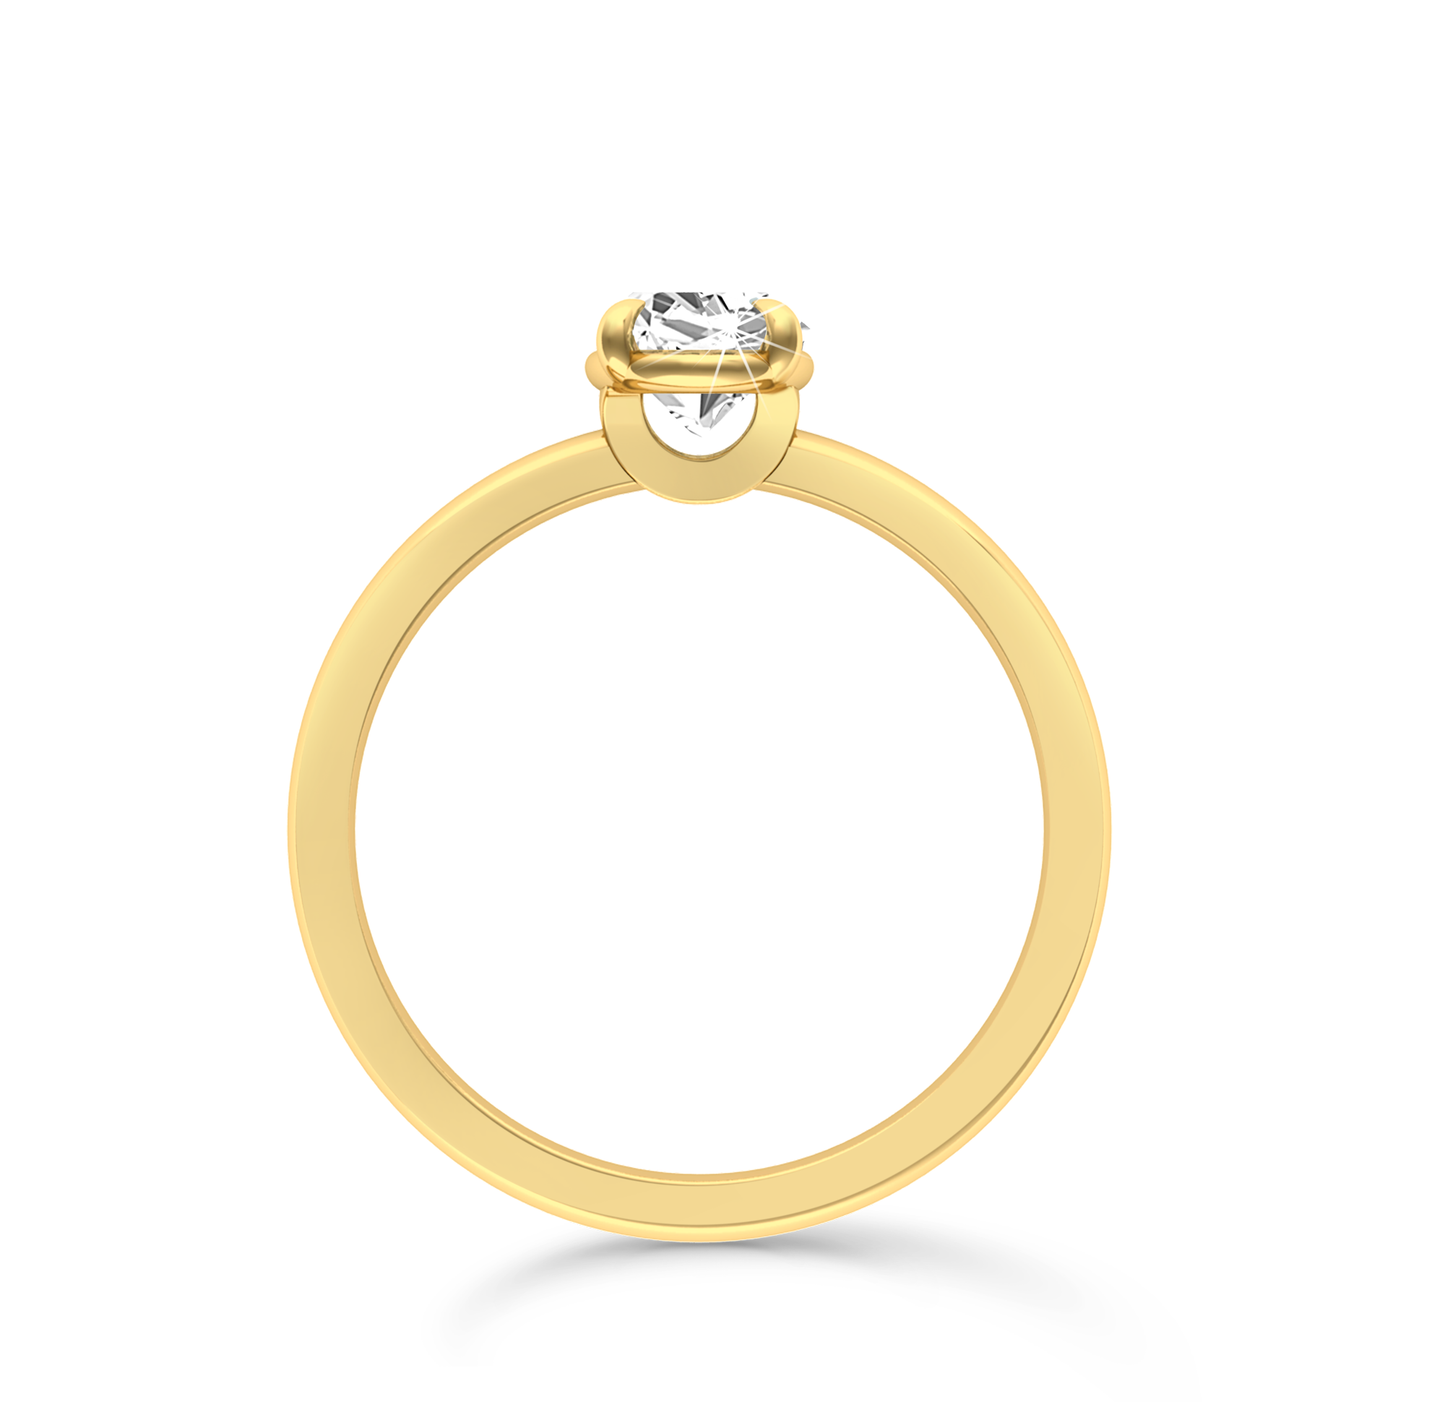 Oval Solitaire Ring in flush setting - Yellow Gold - Bodega